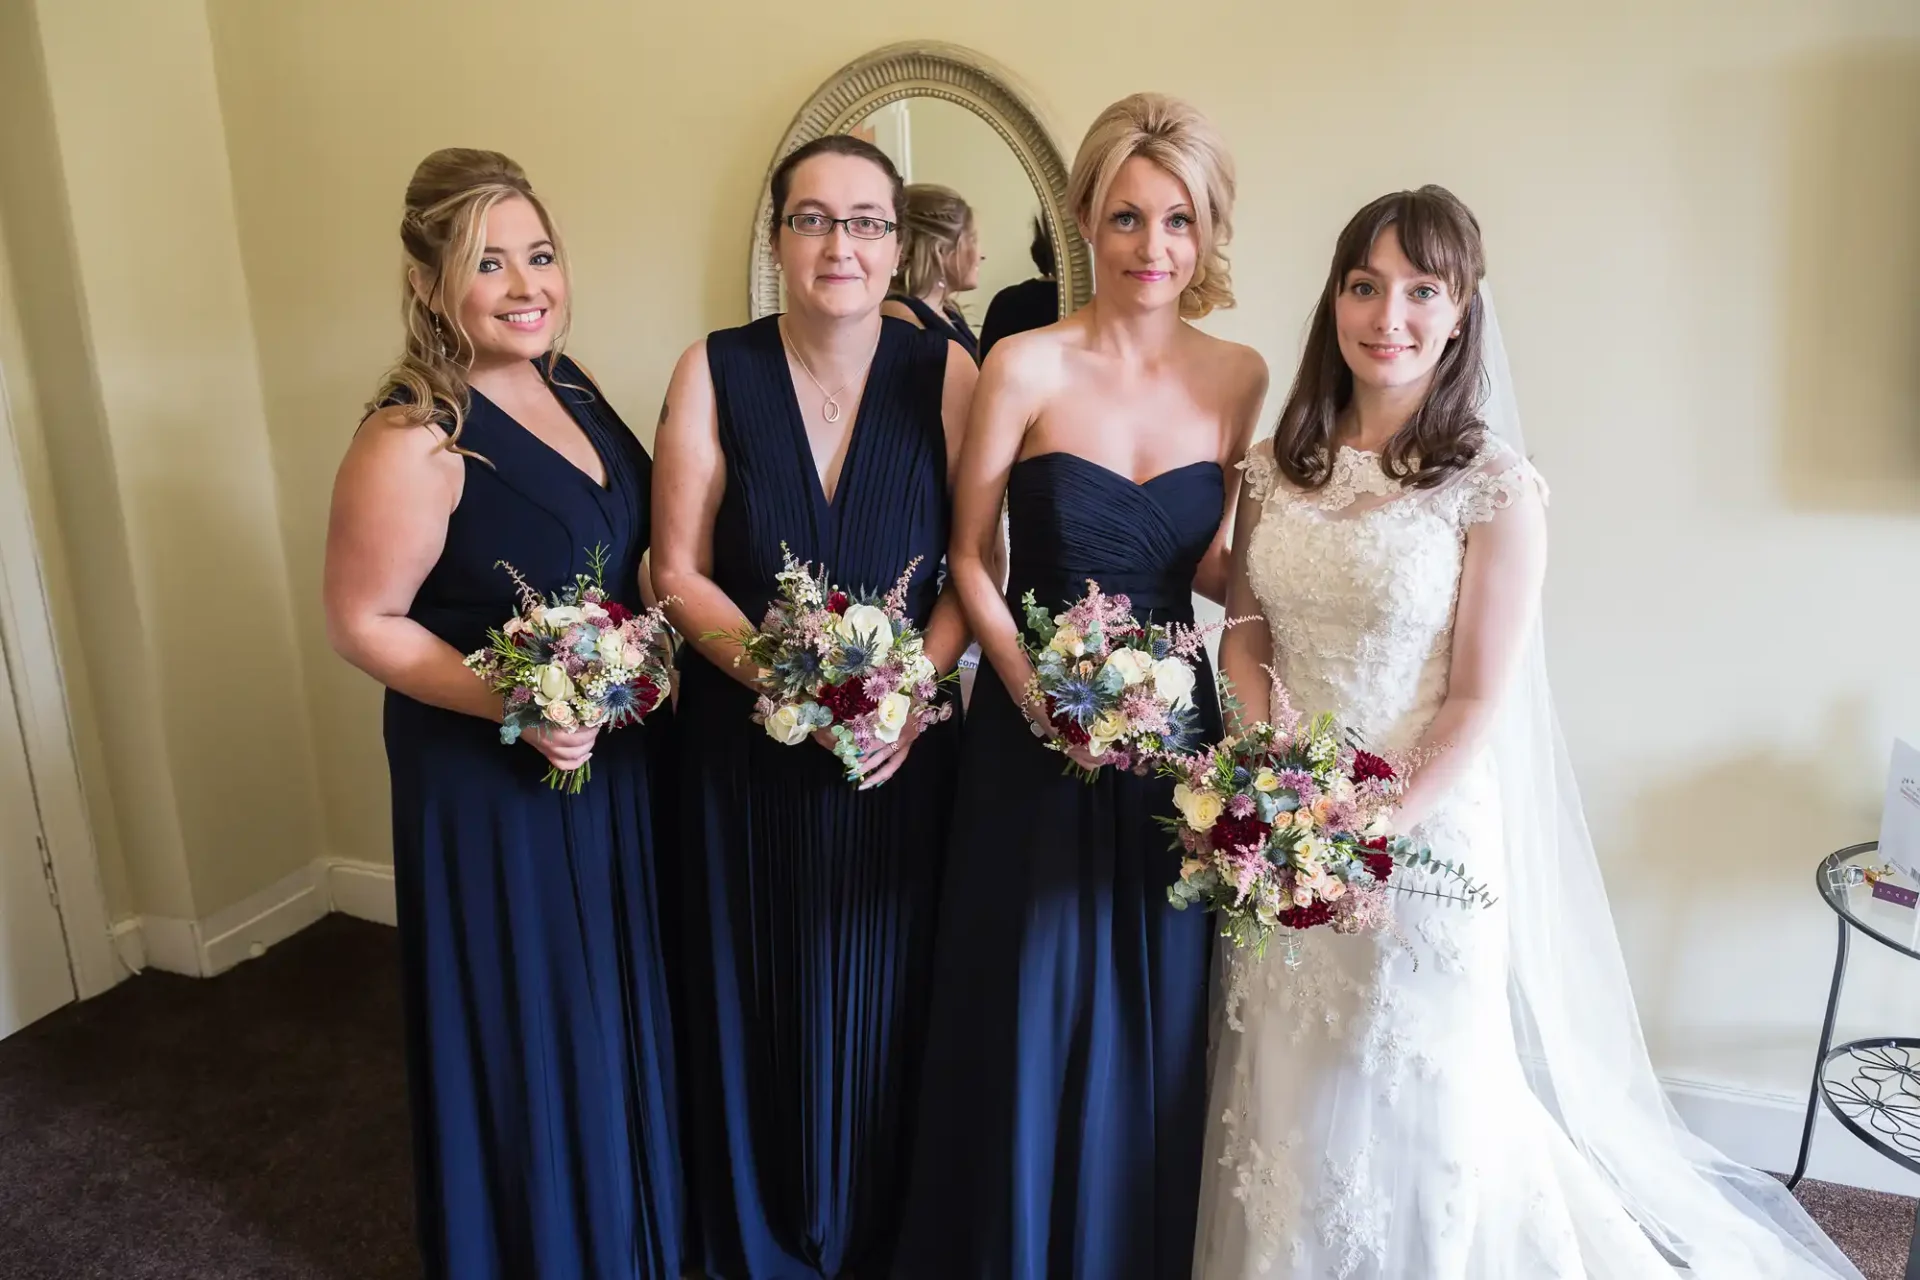 Four women in formal attire, three in navy dresses and one in a bridal gown, holding bouquets and standing in a room with a mirror behind them.